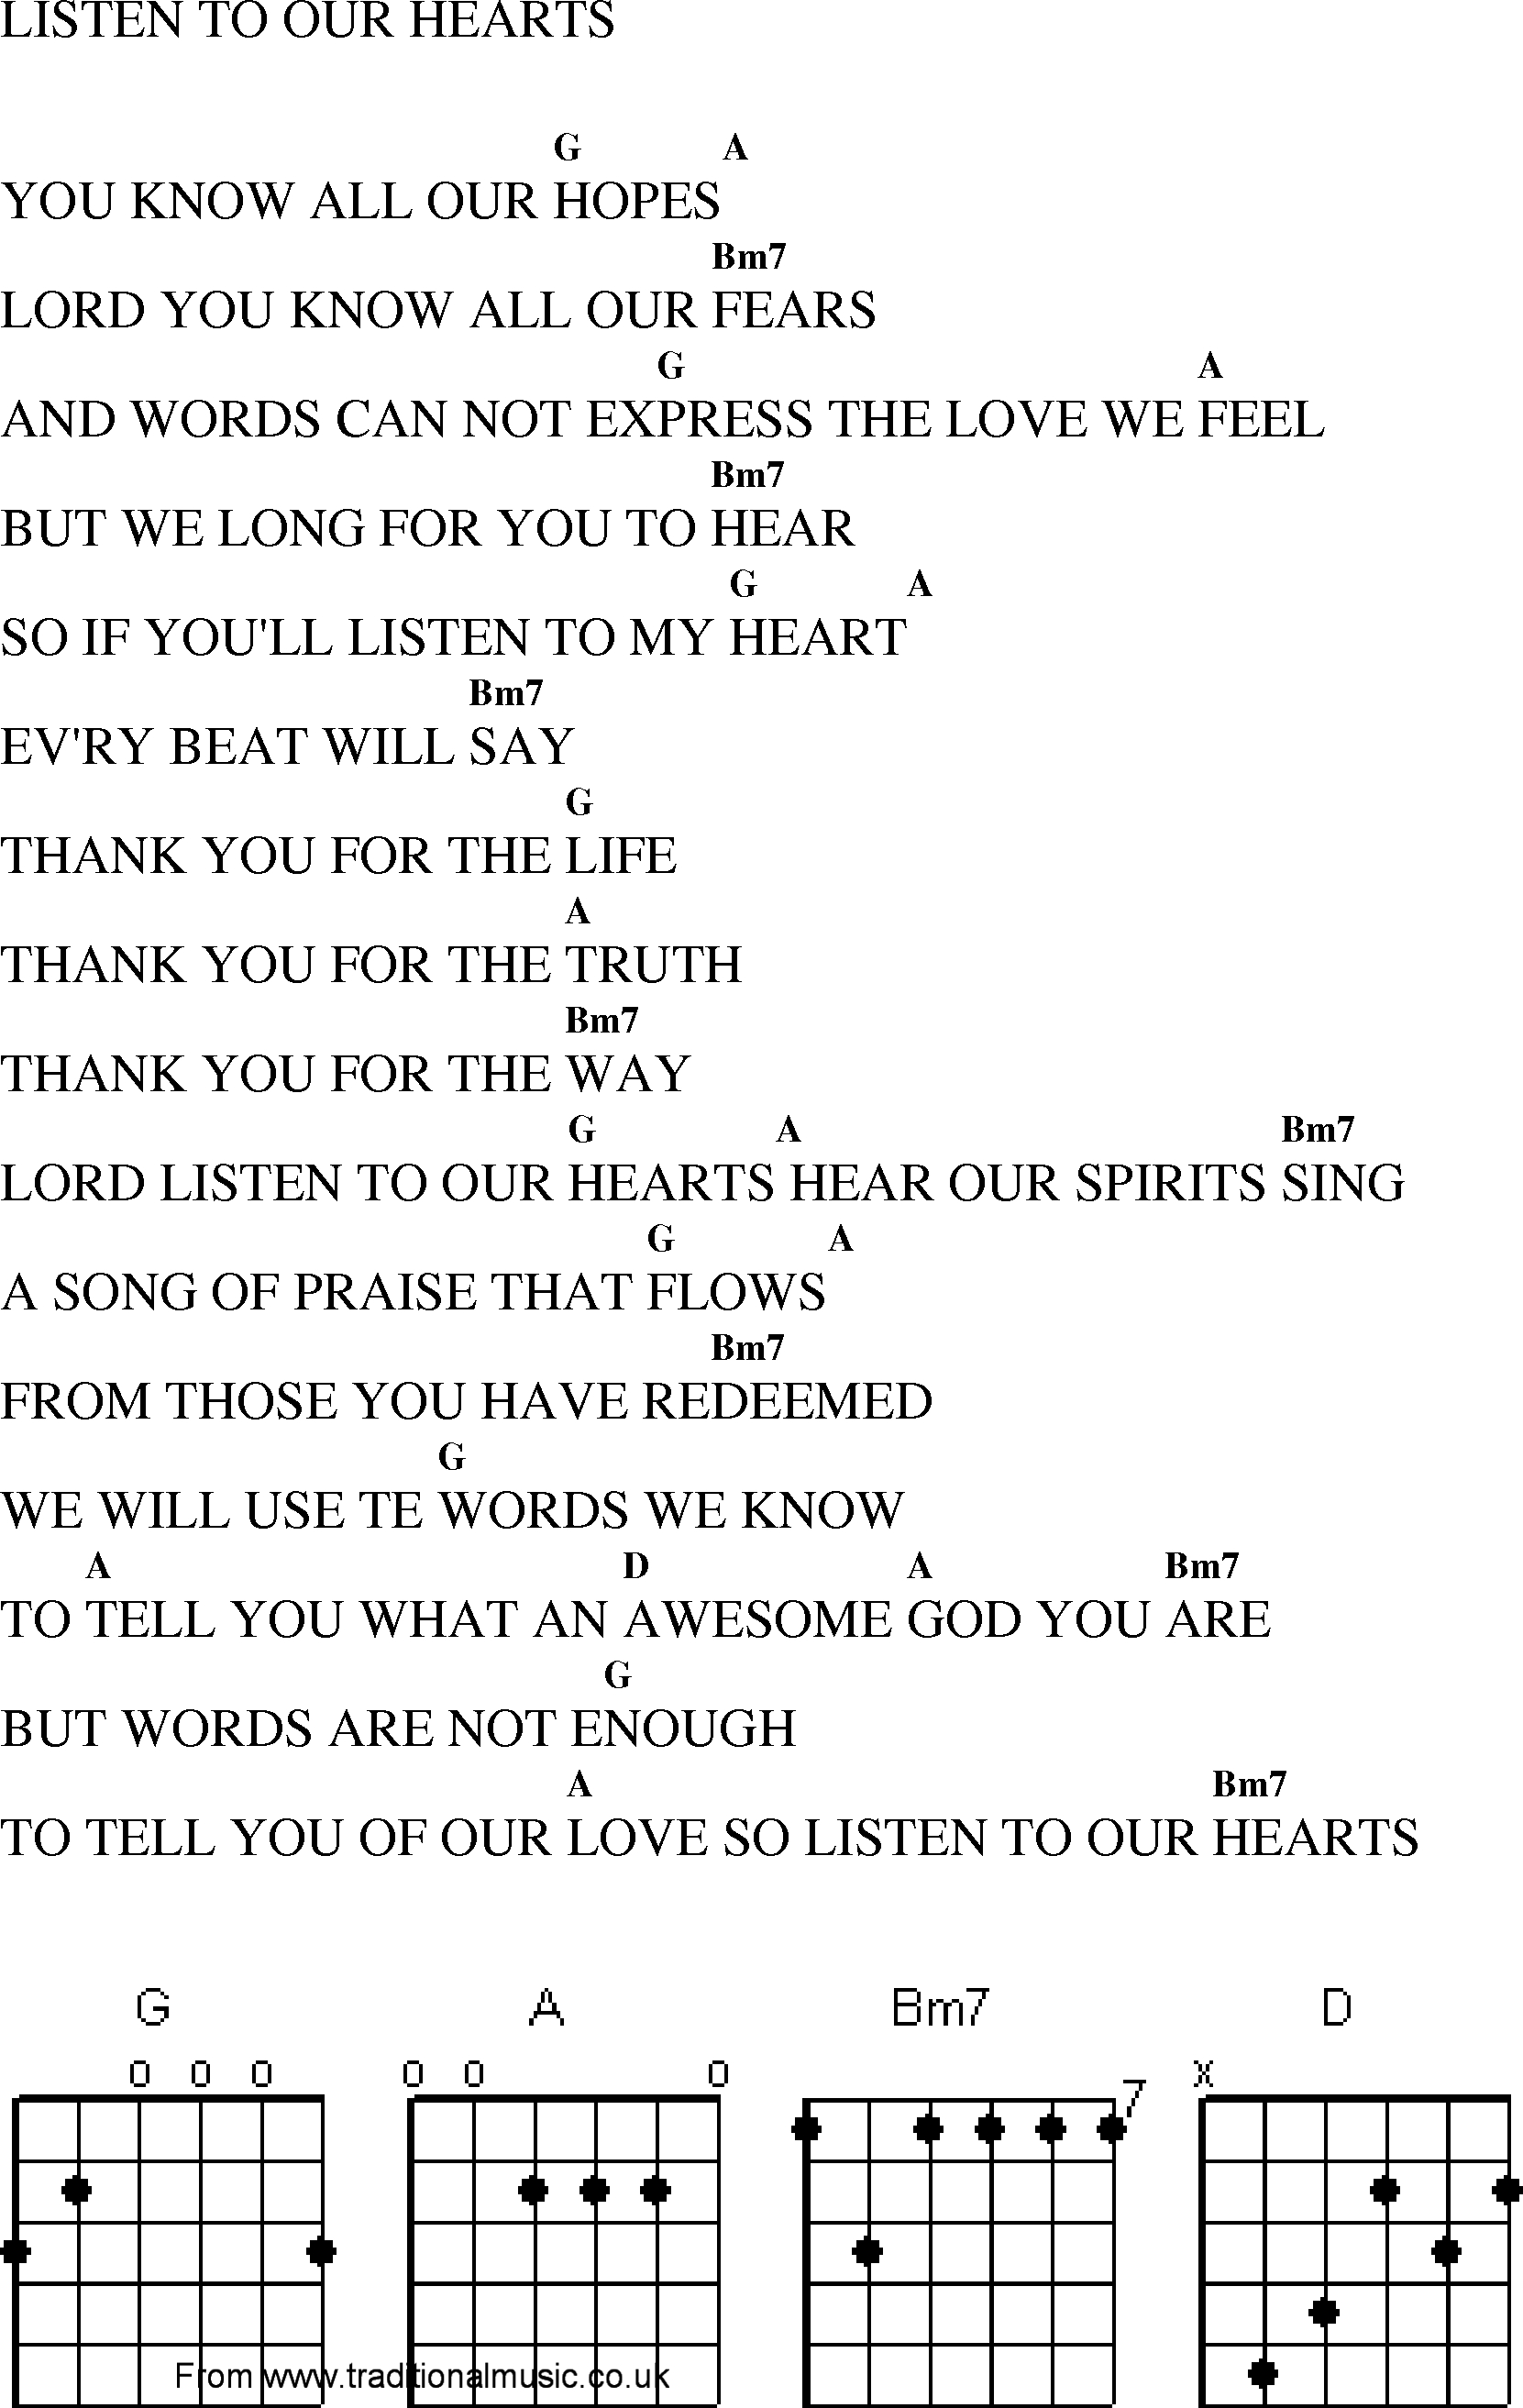 Heart Of Worship Chords Christian Gospel Worship Song Lyrics With Chords Listen To Our Hearts